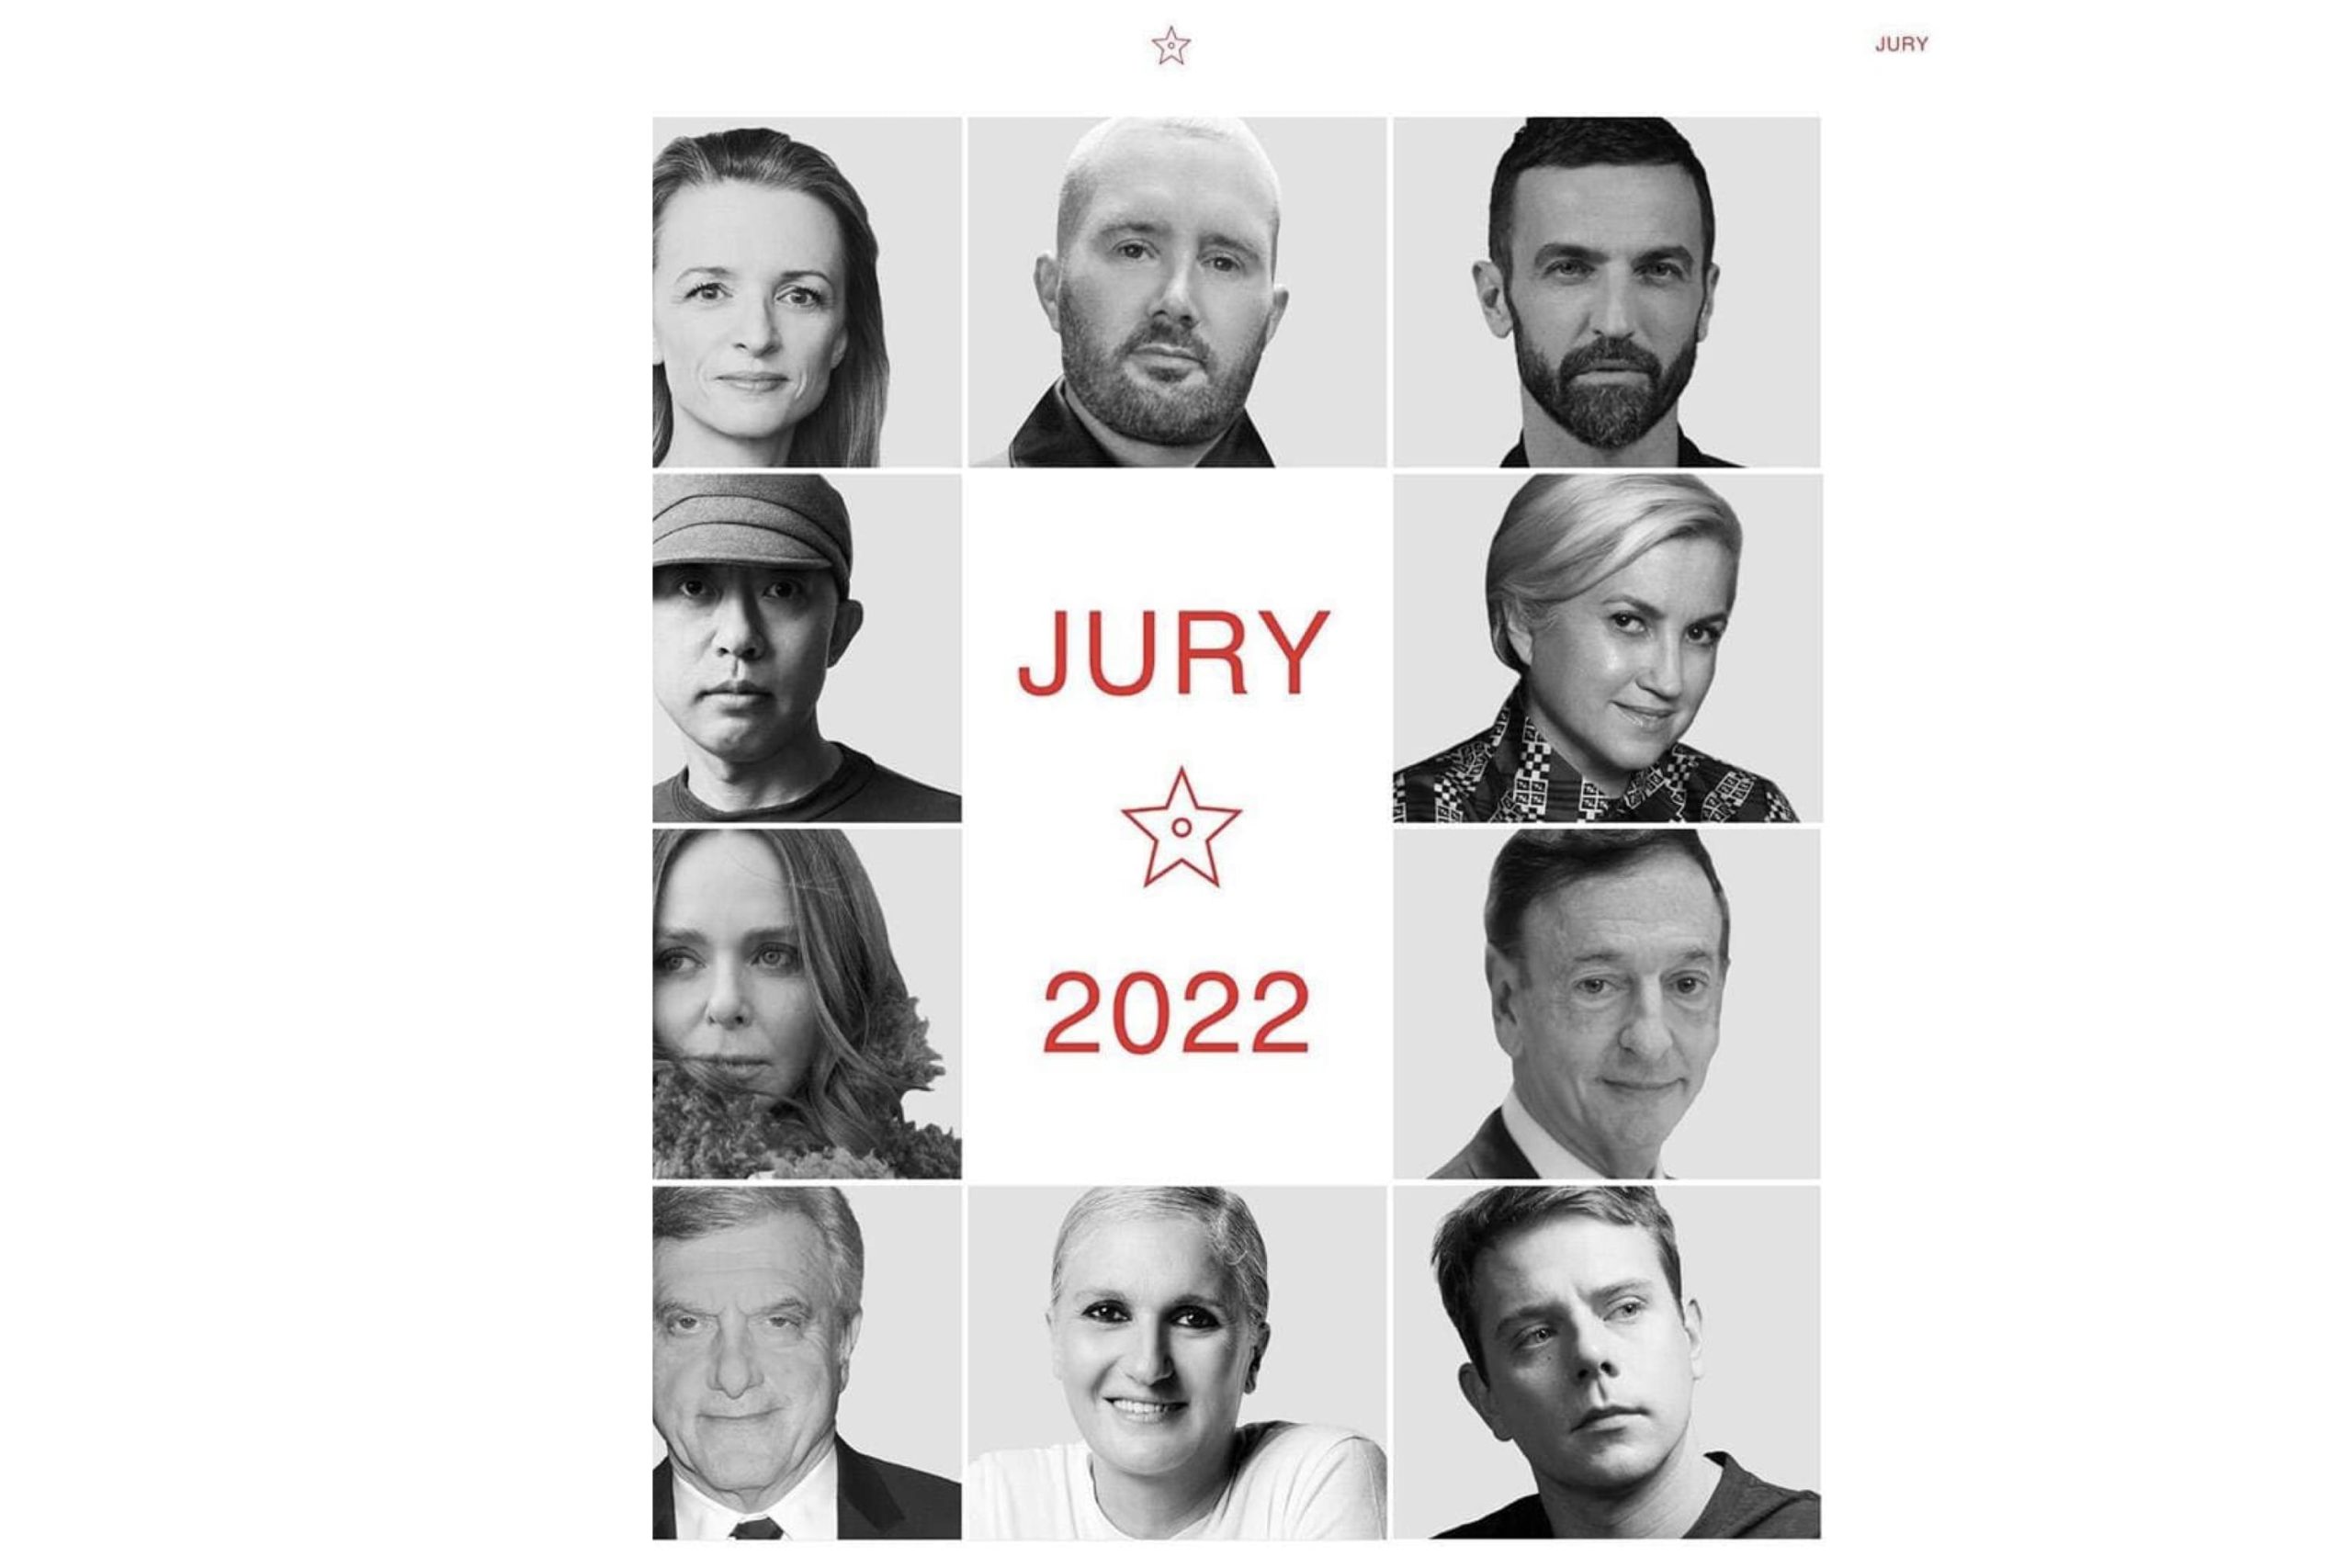 2022 LVMH Prize for Young Fashion Designers, 9th edition: LVMH announces  the date of the 2022 final and the composition of the Jury - LVMH